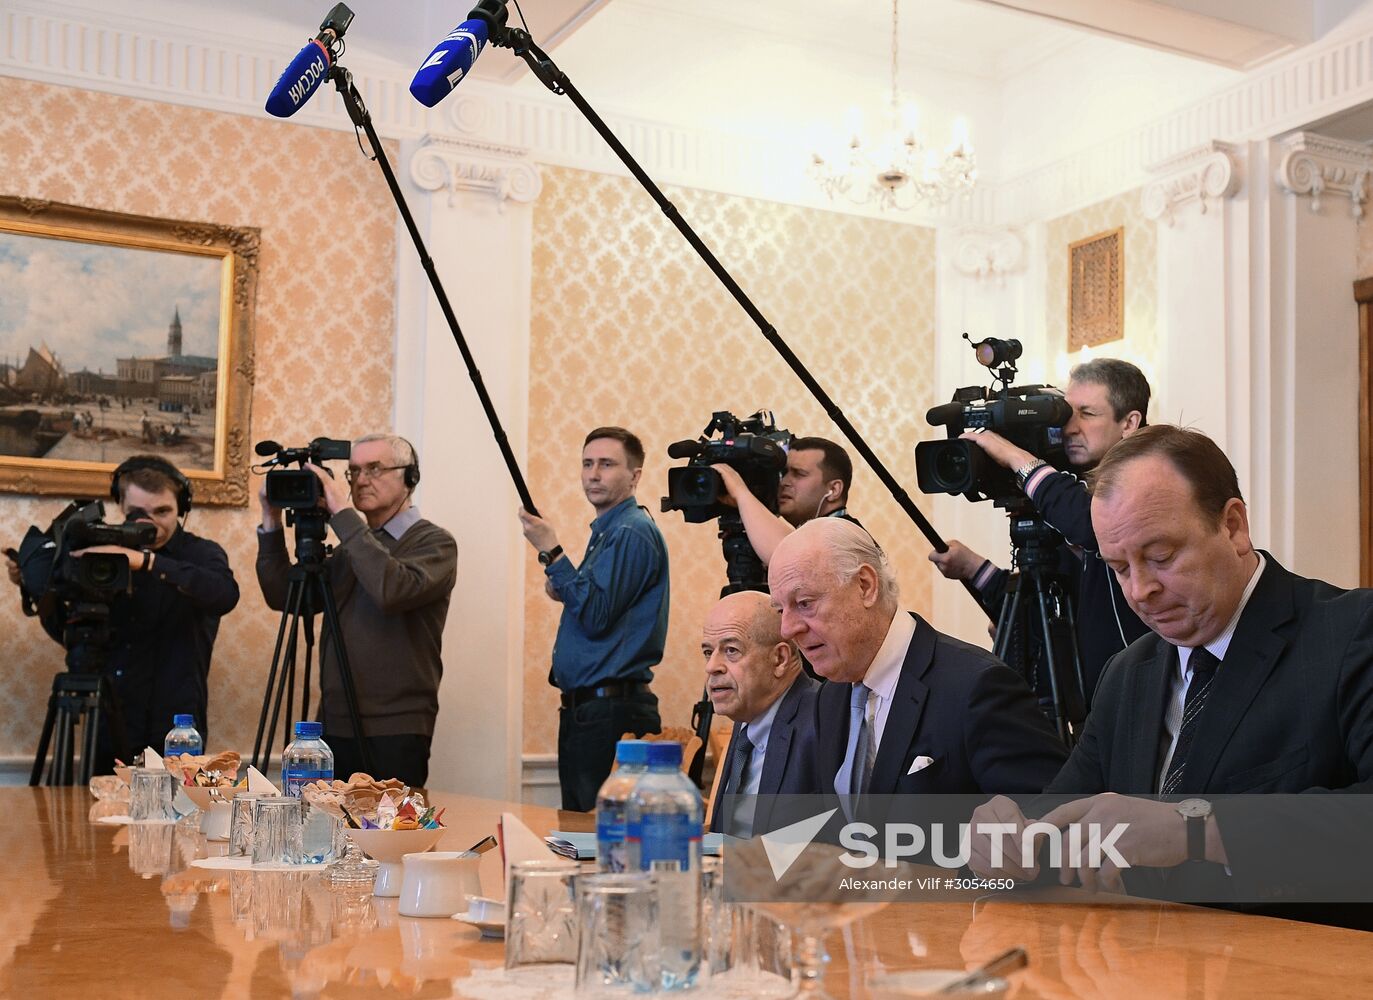 Foreign Minister Sergei Lavrov meets with UN Secretary-General's Special Envoy for Syria Staffan de Mistura